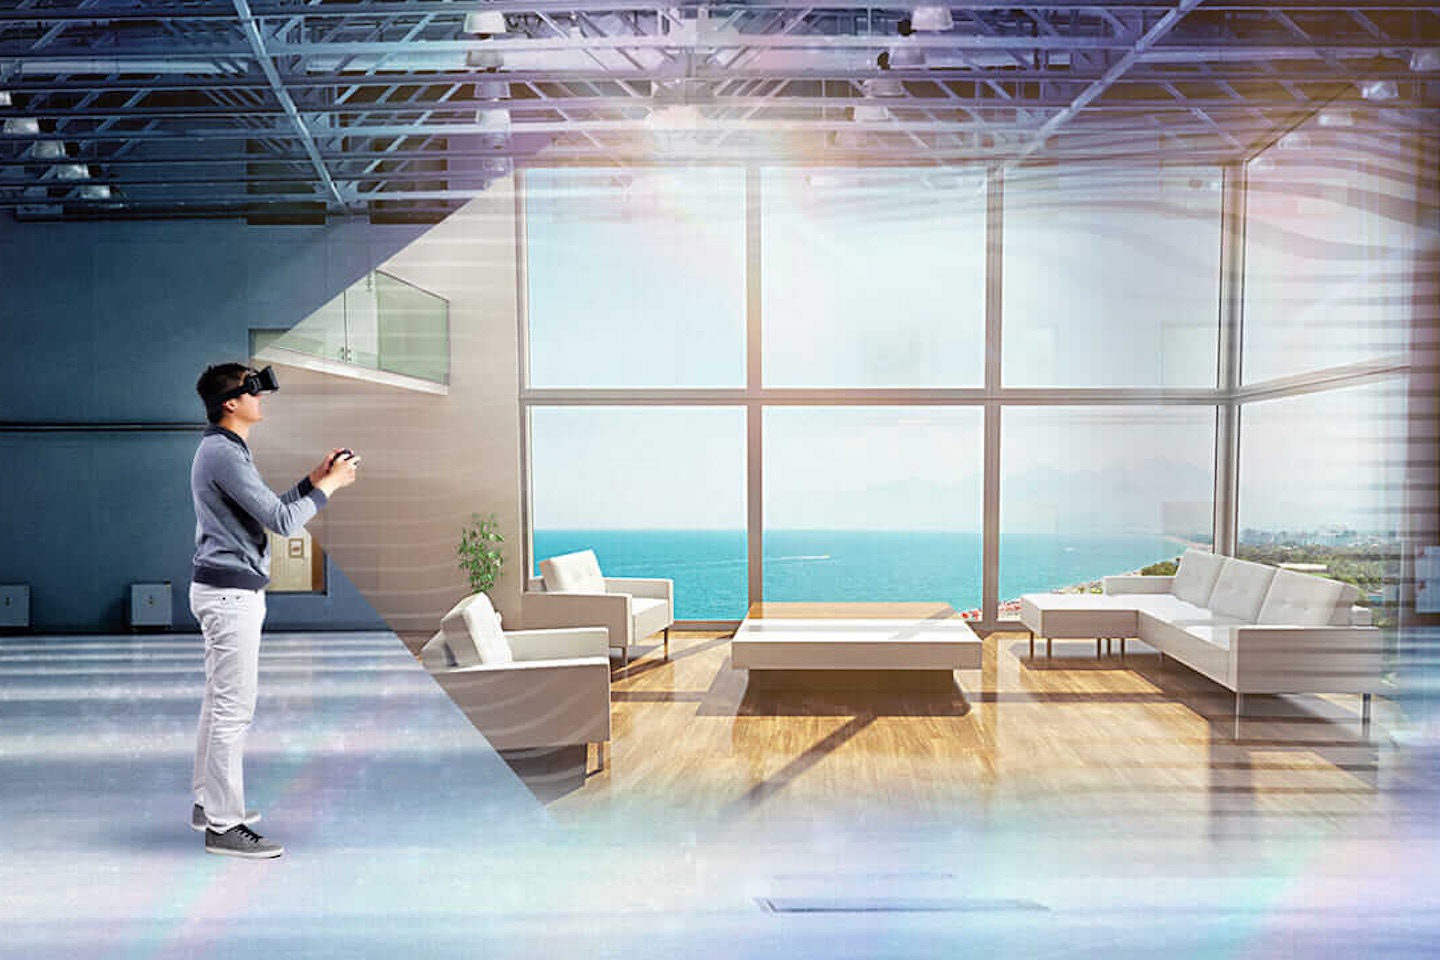 Can-virtual-reality-world-of-interior-design-go-hand-in-hand